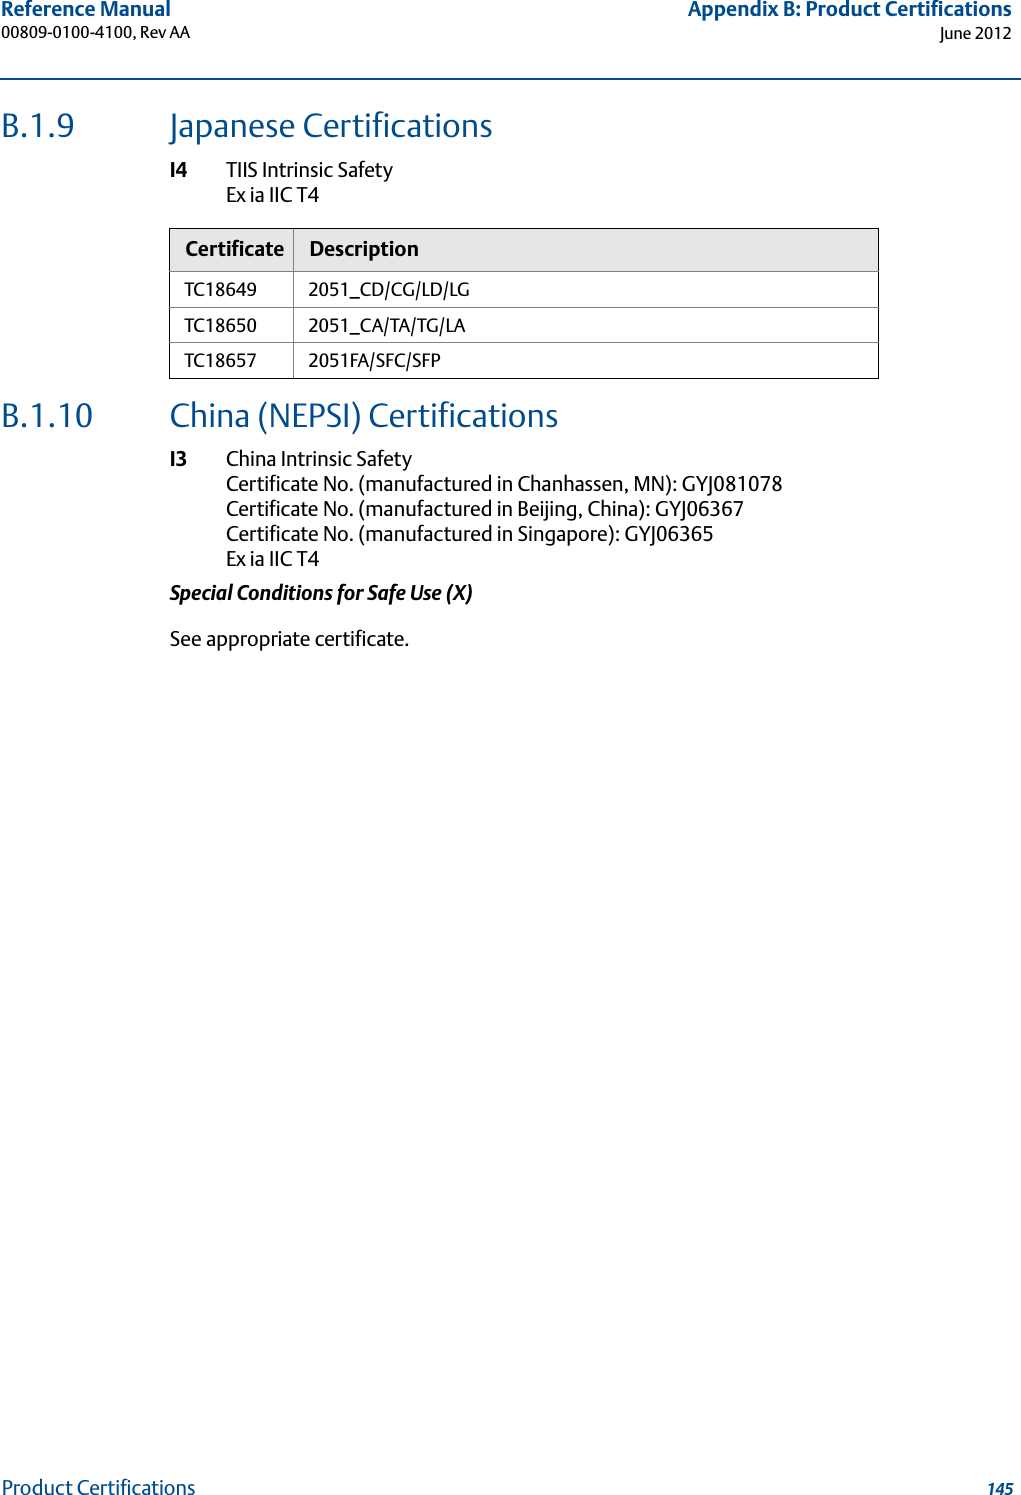 145Reference Manual 00809-0100-4100, Rev AAAppendix B: Product CertificationsJune 2012Product CertificationsB.1.9 Japanese Certifications I4 TIIS Intrinsic SafetyEx ia IIC T4B.1.10 China (NEPSI) CertificationsI3 China Intrinsic SafetyCertificate No. (manufactured in Chanhassen, MN): GYJ081078 Certificate No. (manufactured in Beijing, China): GYJ06367 Certificate No. (manufactured in Singapore): GYJ06365Ex ia IIC T4Special Conditions for Safe Use (X)See appropriate certificate.Certificate DescriptionTC18649 2051_CD/CG/LD/LGTC18650 2051_CA/TA/TG/LATC18657 2051FA/SFC/SFP